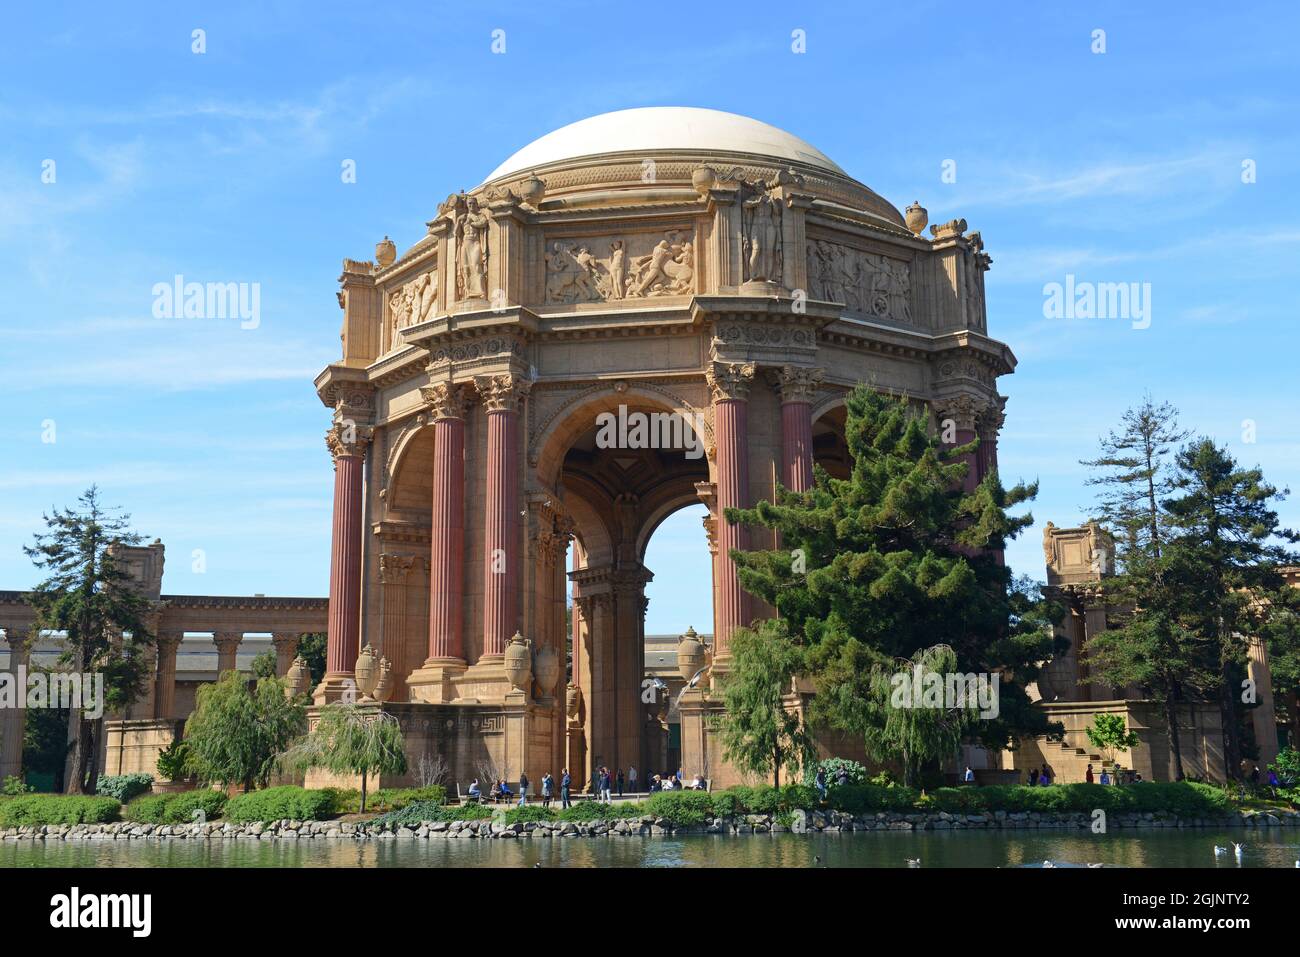 The Palace of Fine Arts was built in 1915 with Beaux Arts style at 3601 Lyon Street in San Francisco, California CA, USA. Stock Photo